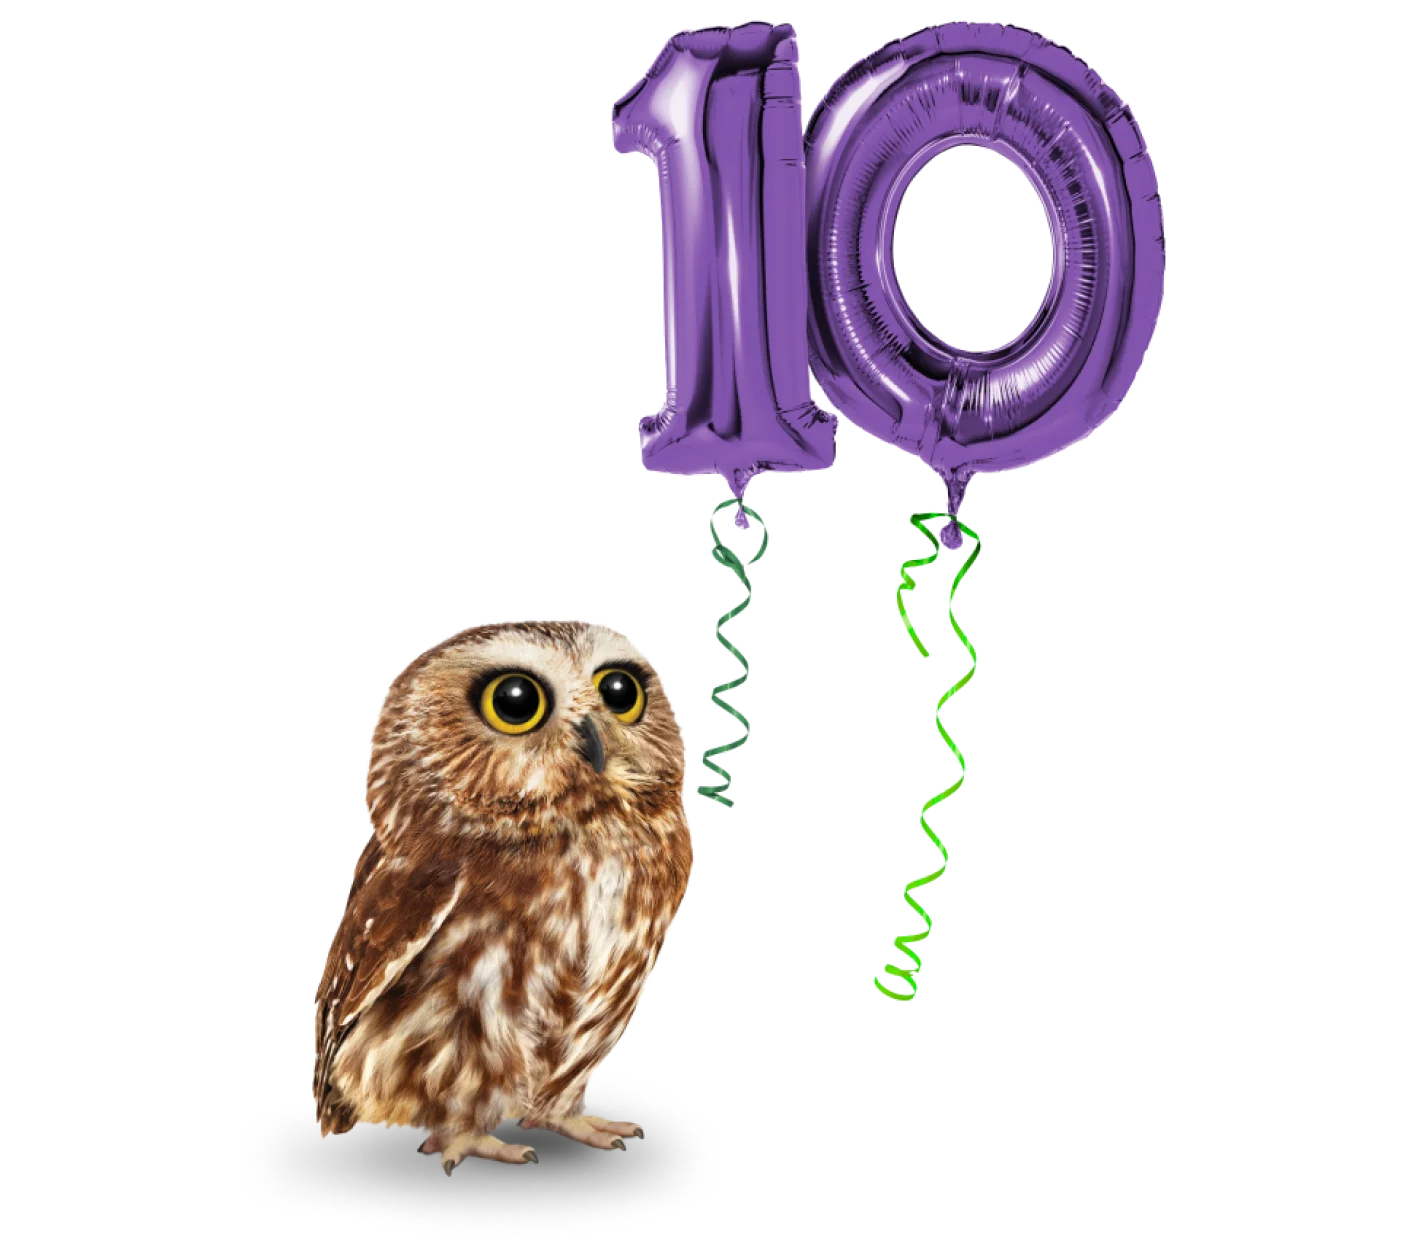 A saw-whet owl looking up at a pair of balloons in the shape of the number 10.